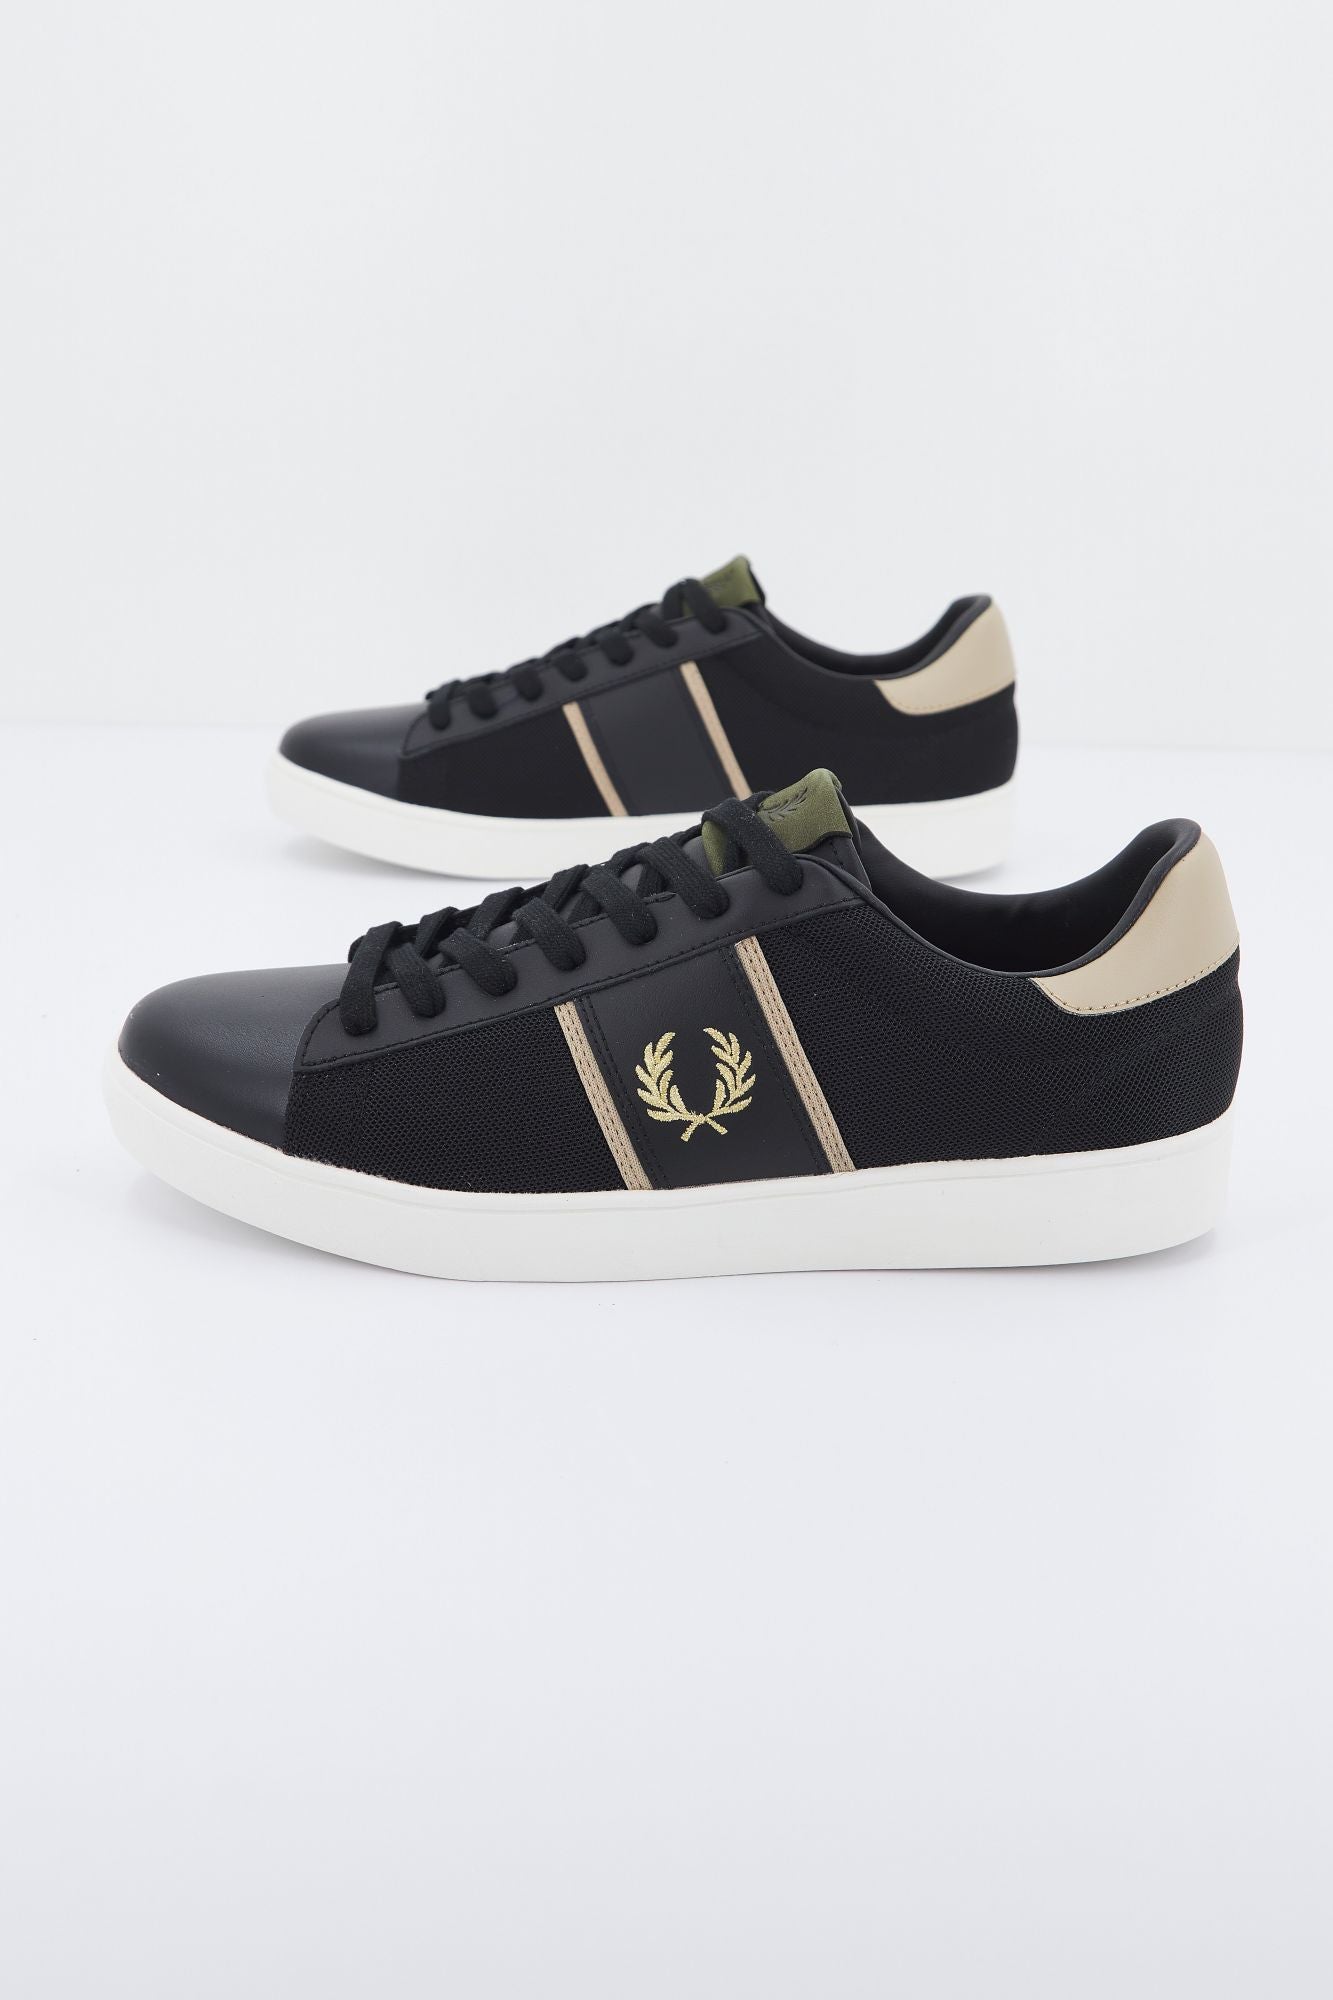 FRED PERRY B3302 en color NEGRO (2)